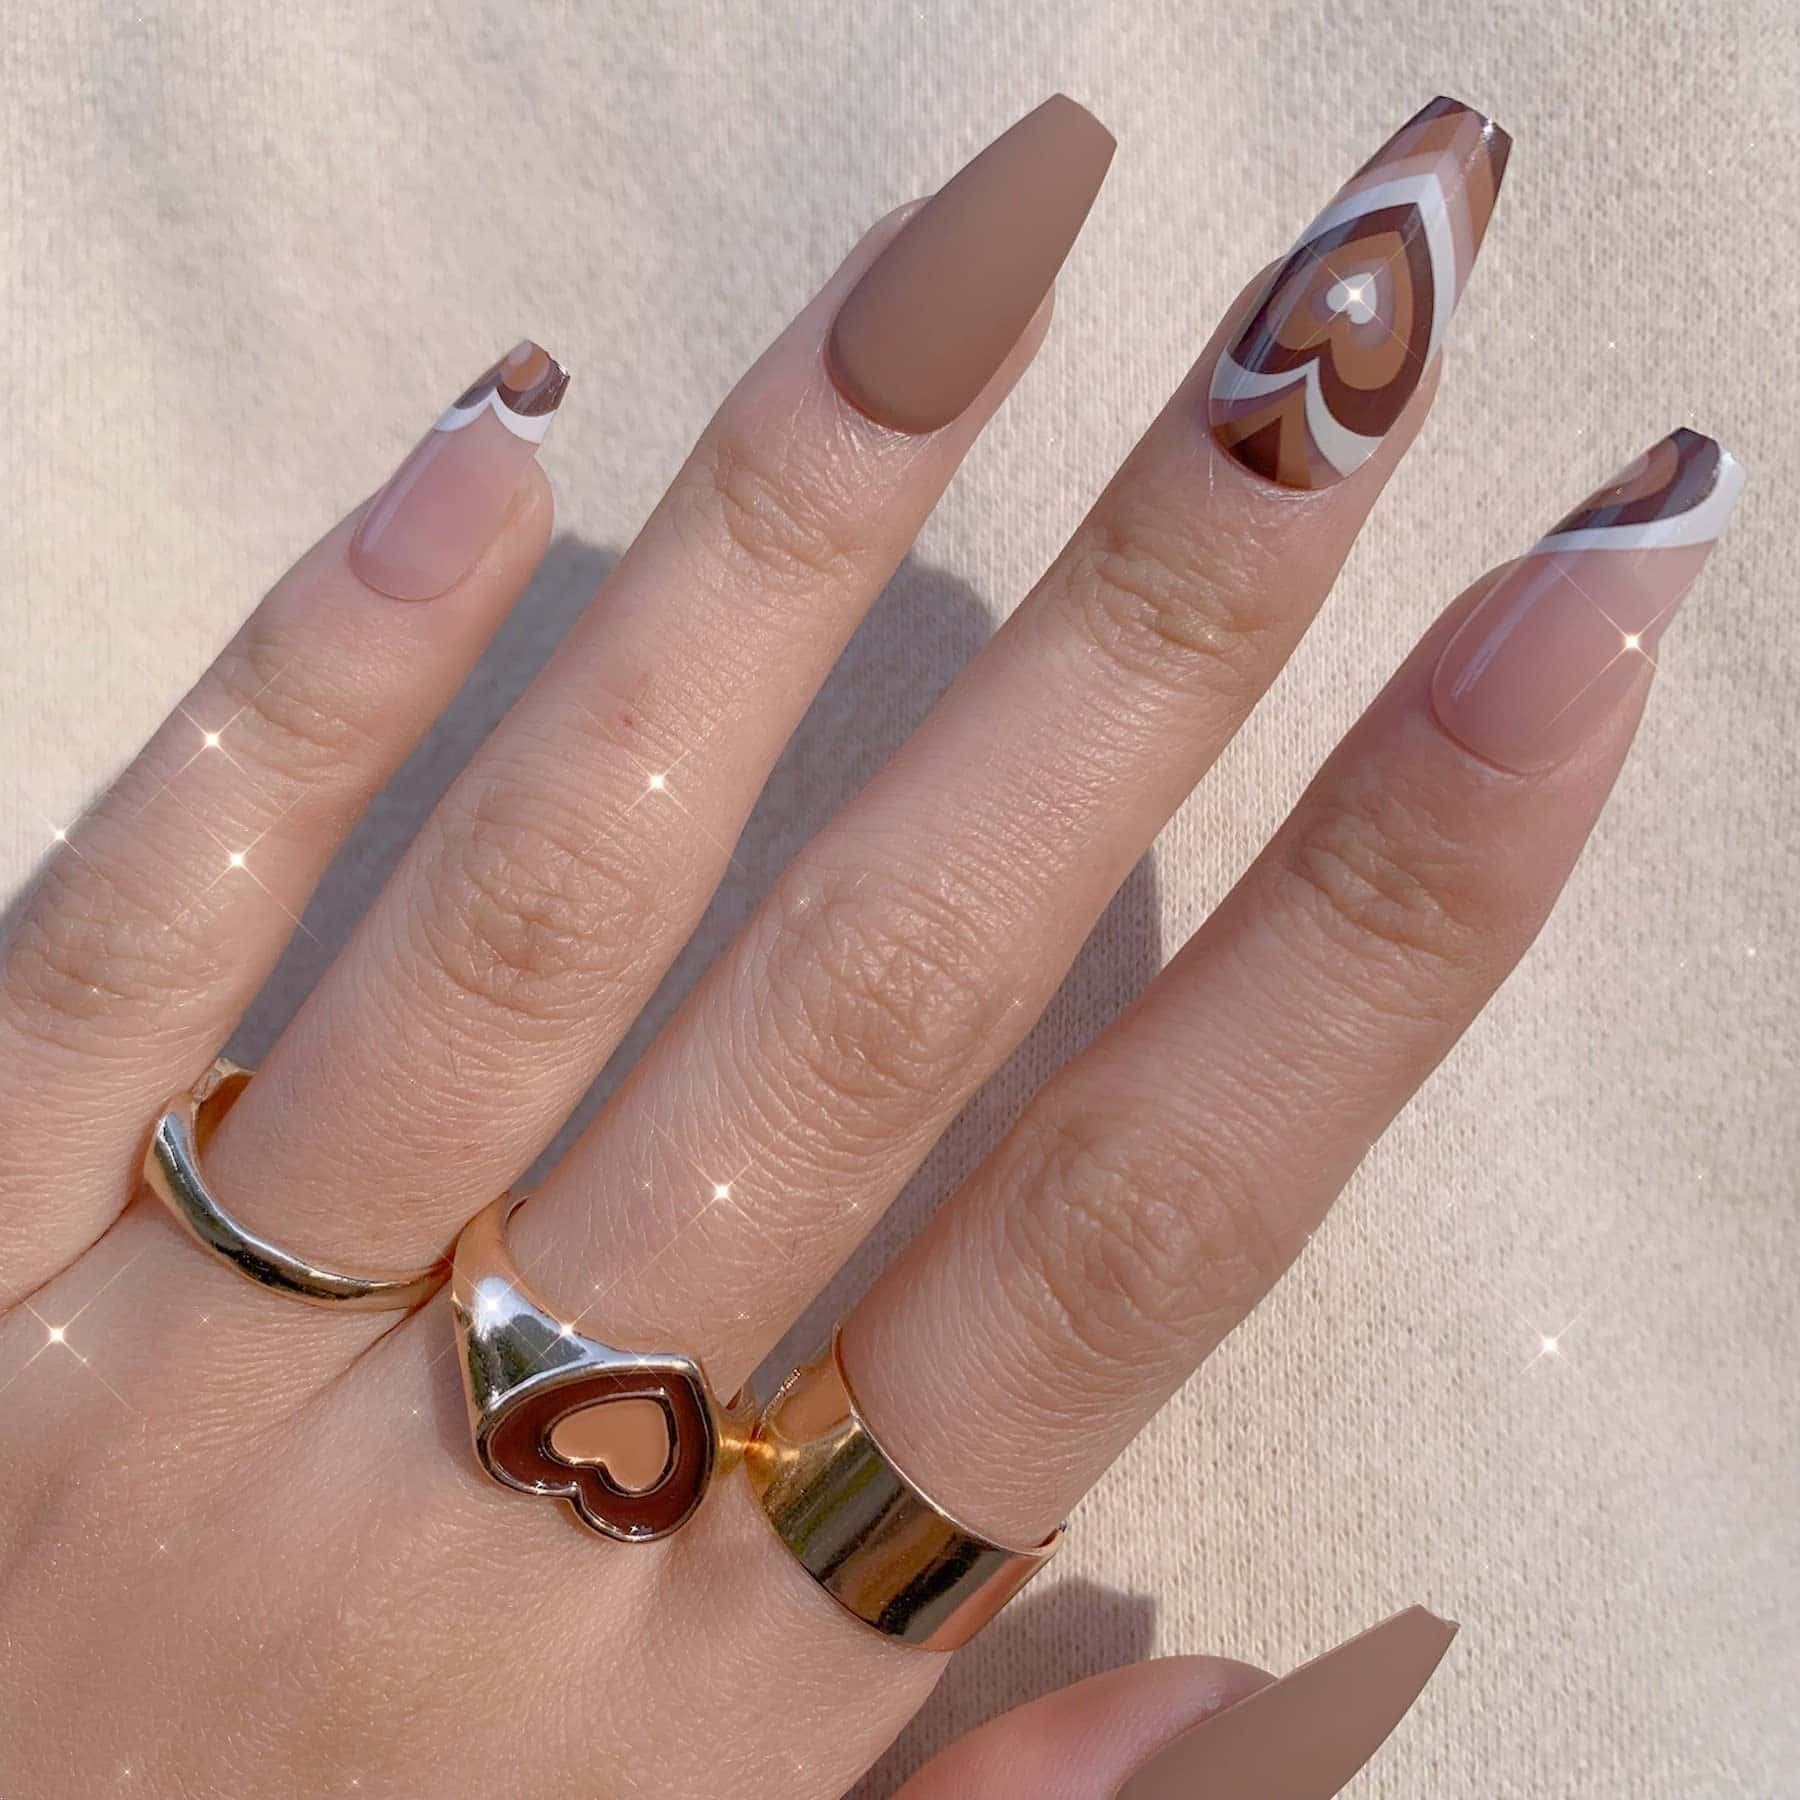 Get creative with your nails with Fake Nail